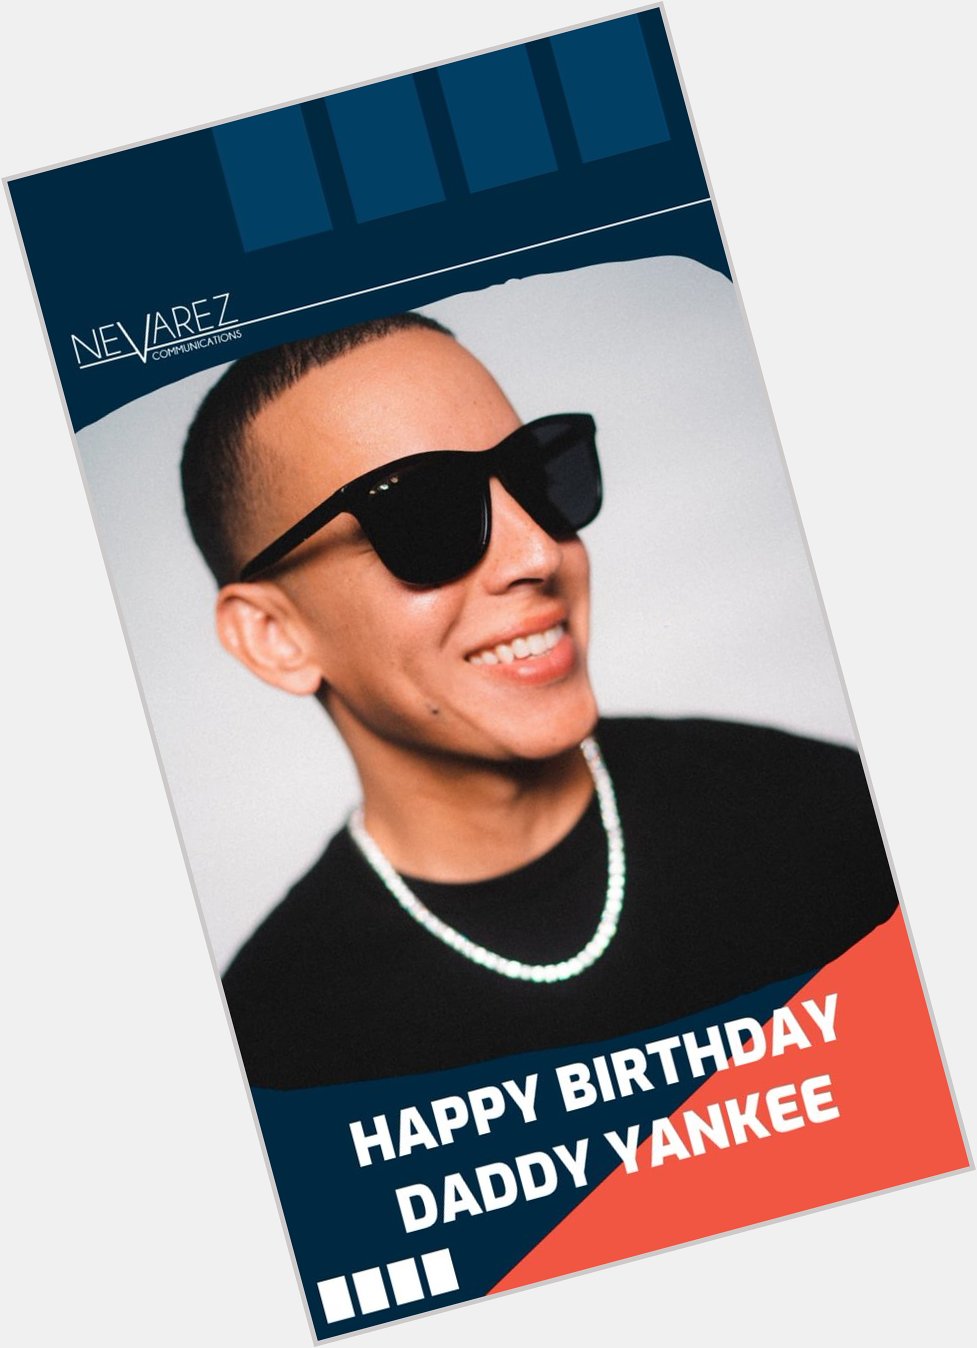 Happy Birthday Daddy Yankee ! And celebrate with us 